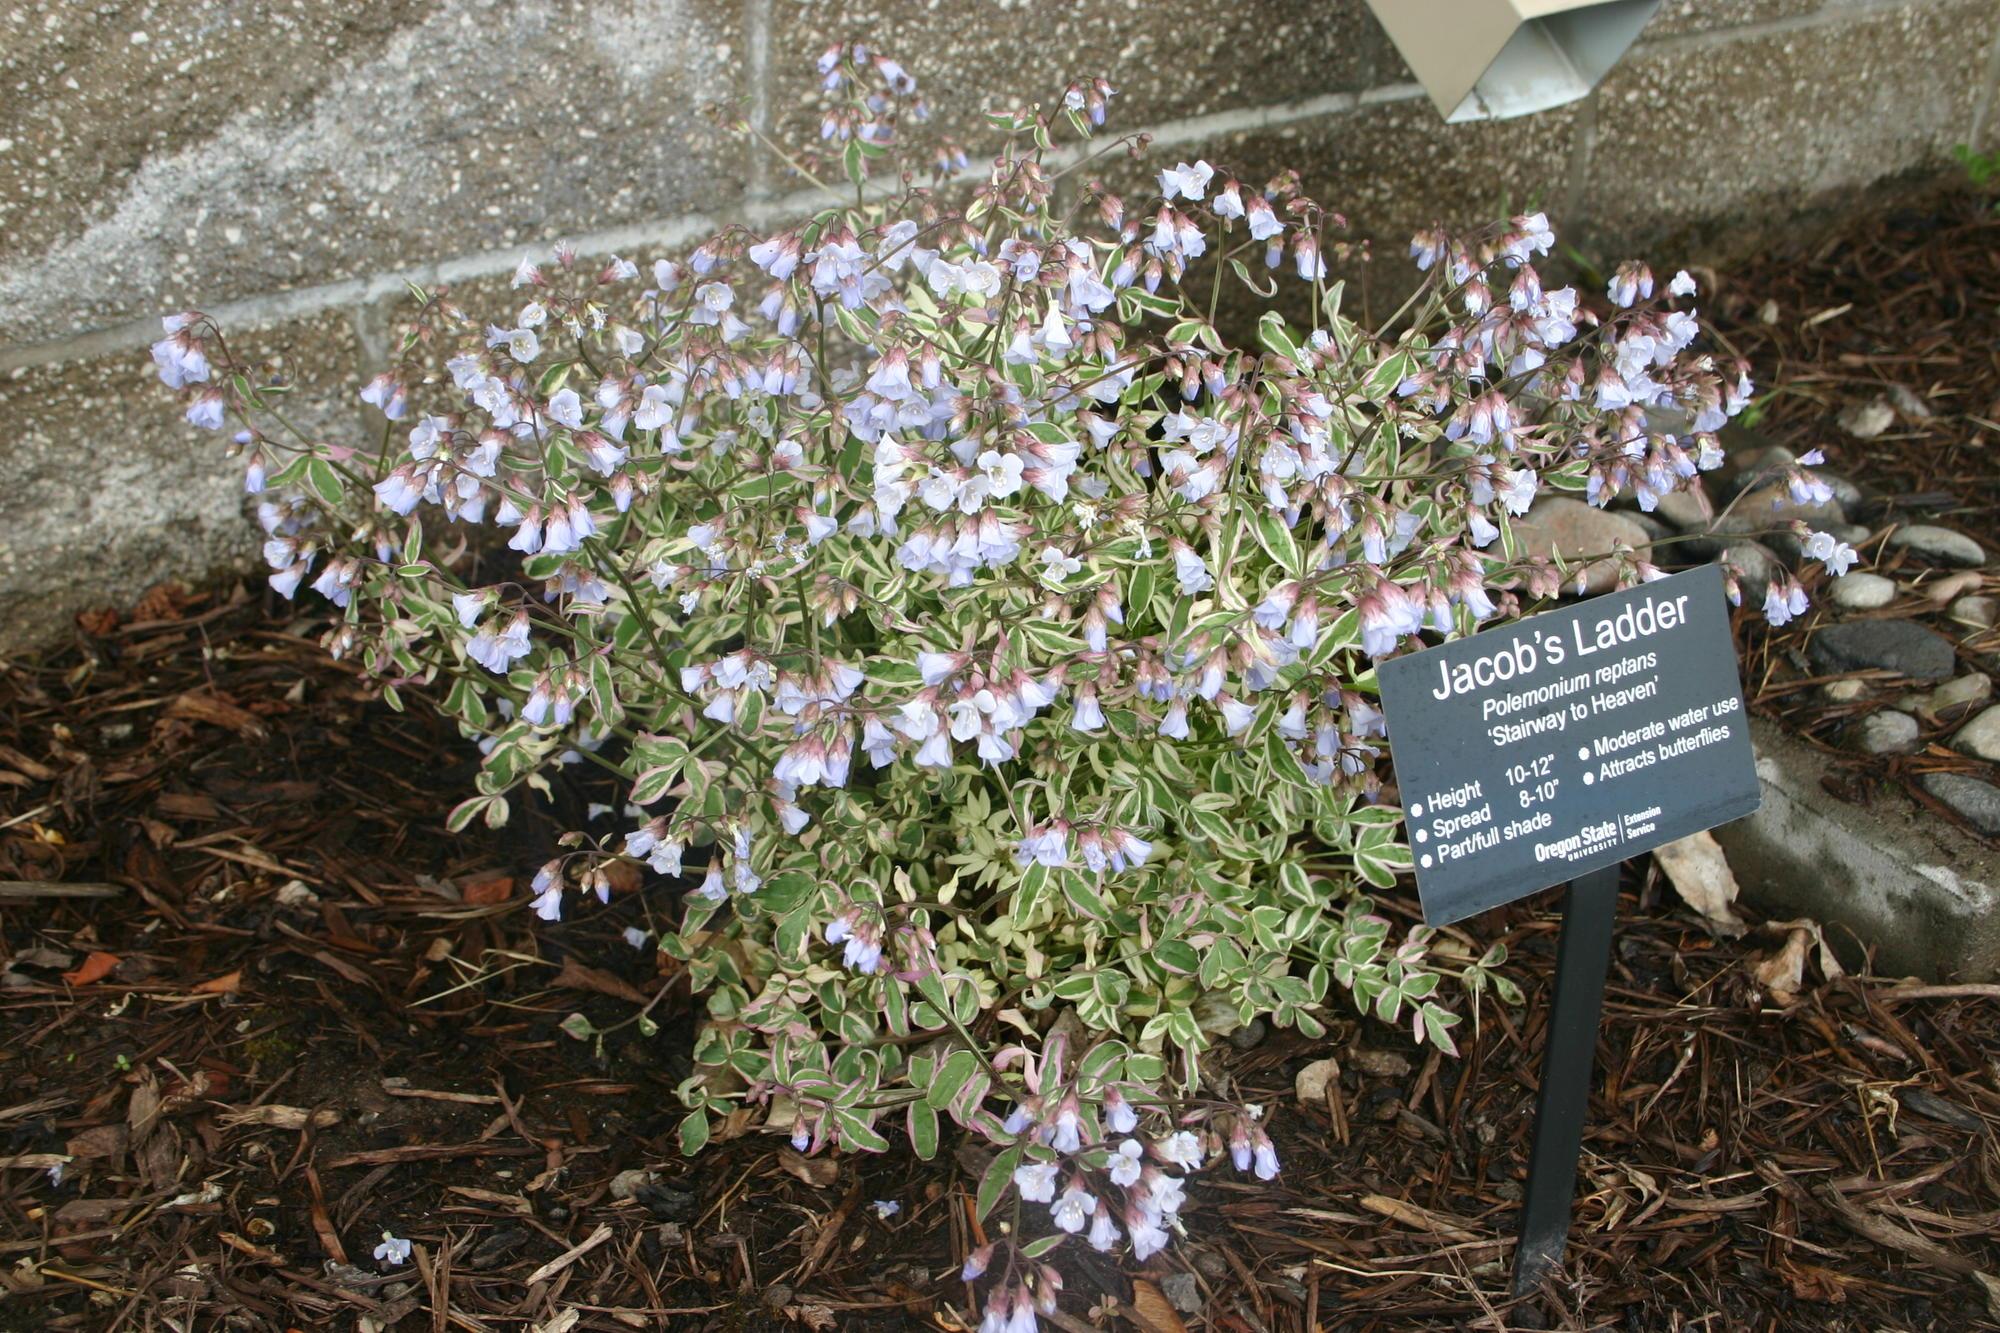 A Jacob's ladder plant with a sign labelling it.